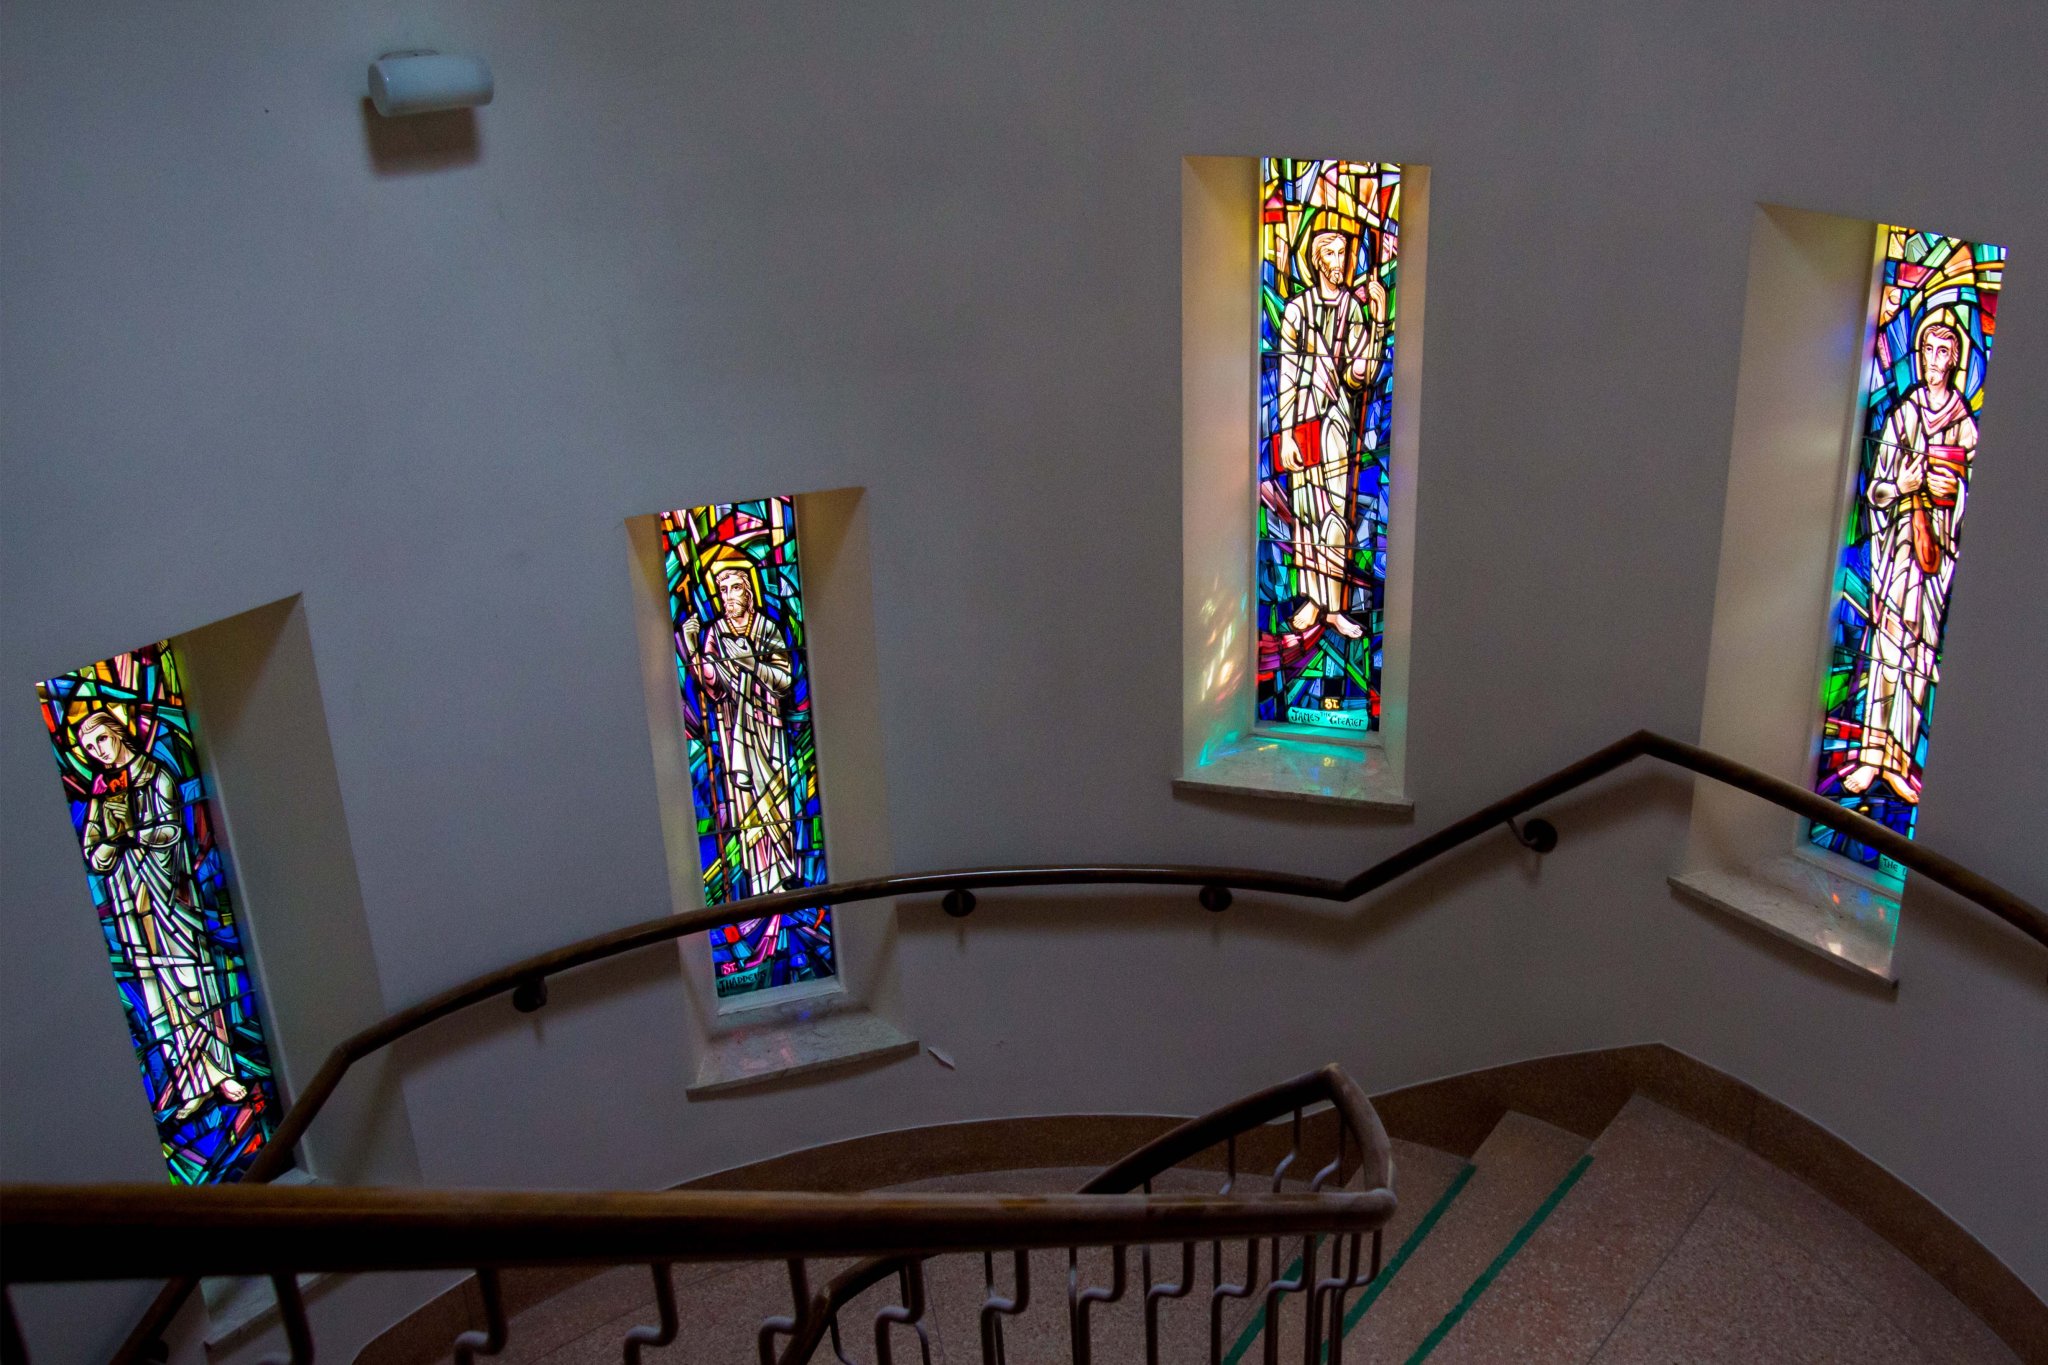 Descending Stairwell Featuring Four of the Twelve Apostles